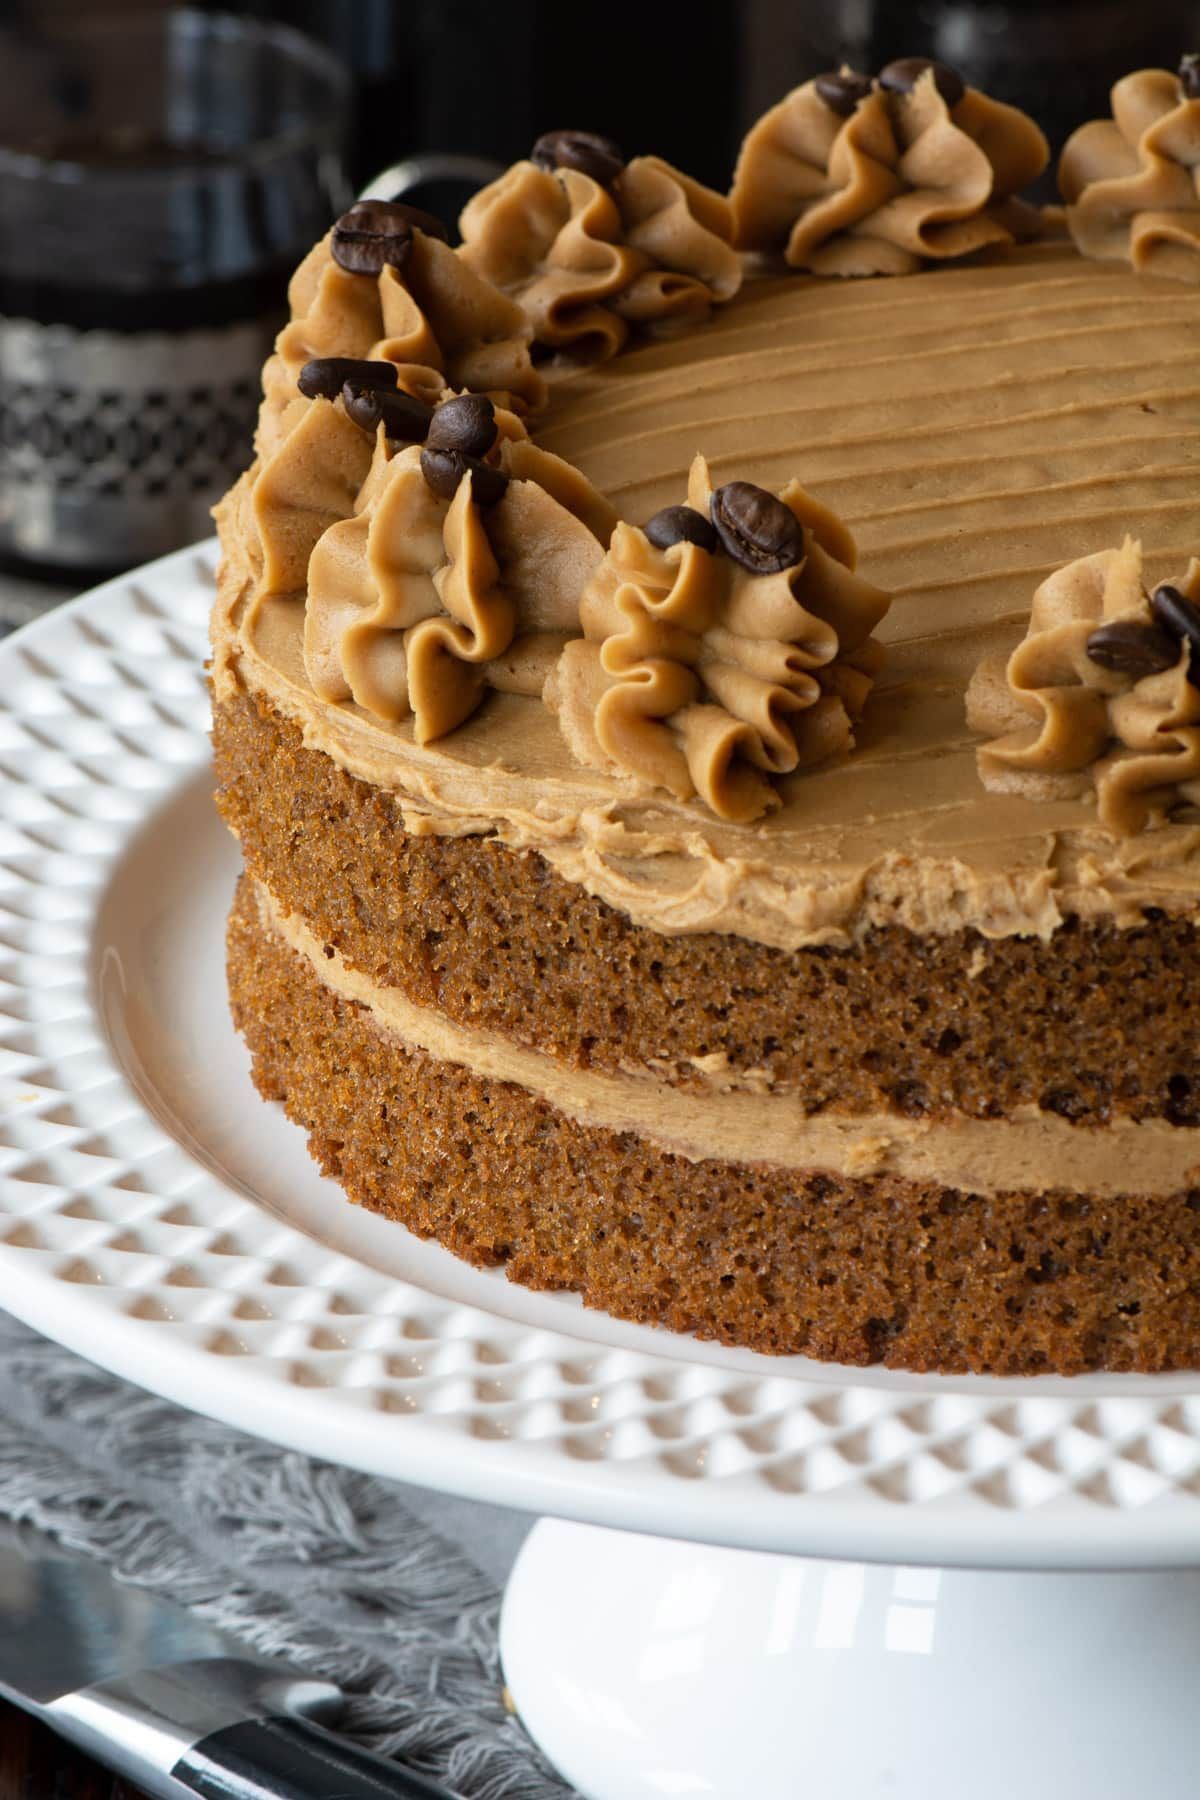 Best Coffee Cake Recipe Ever That Everyone Loves - SoloTasty -   14 cake Coffee design ideas